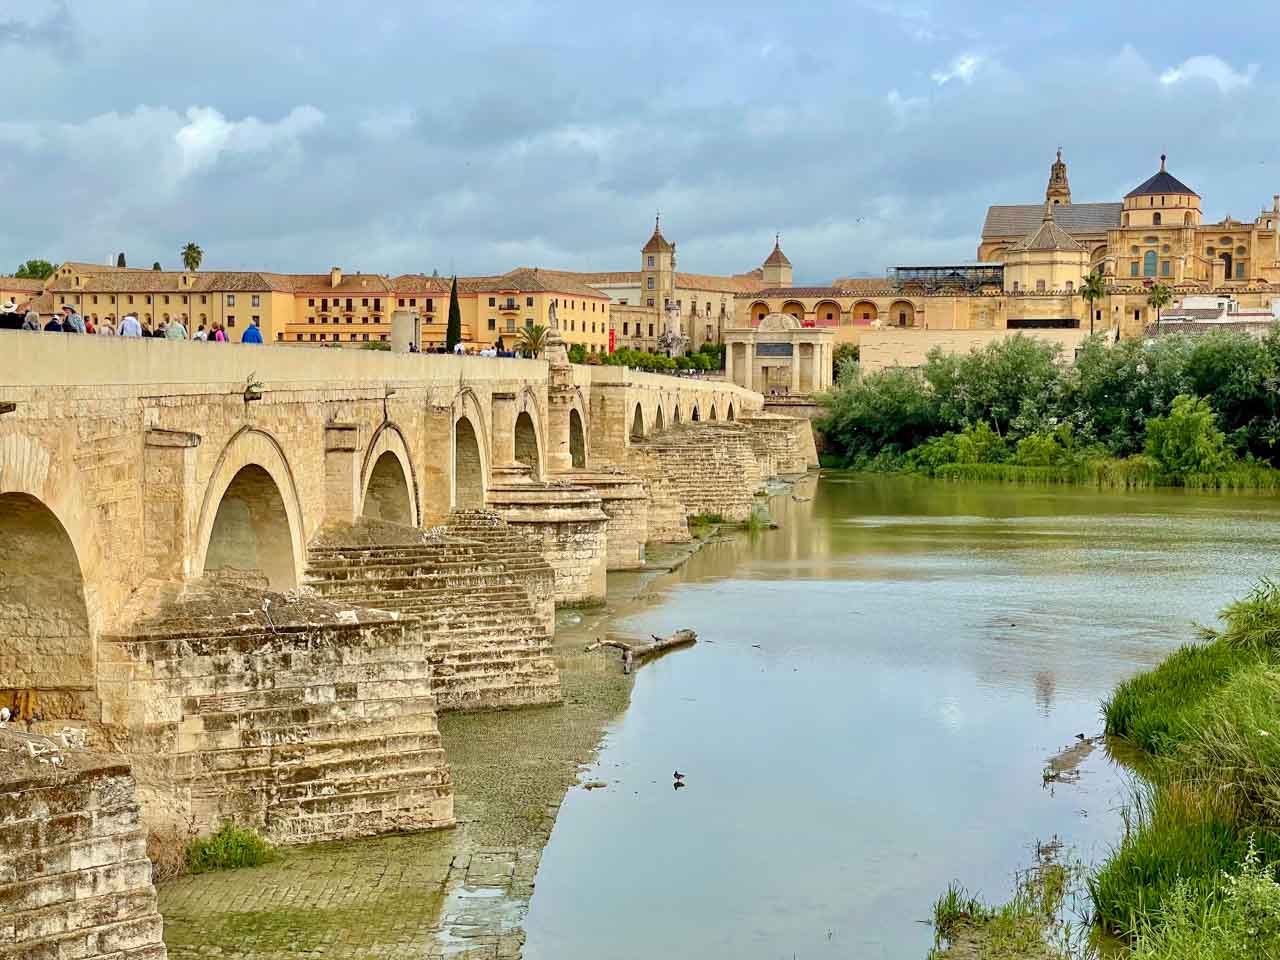 A multi-arched stone bridge with buttresses spans a river and leads to a medieval city.